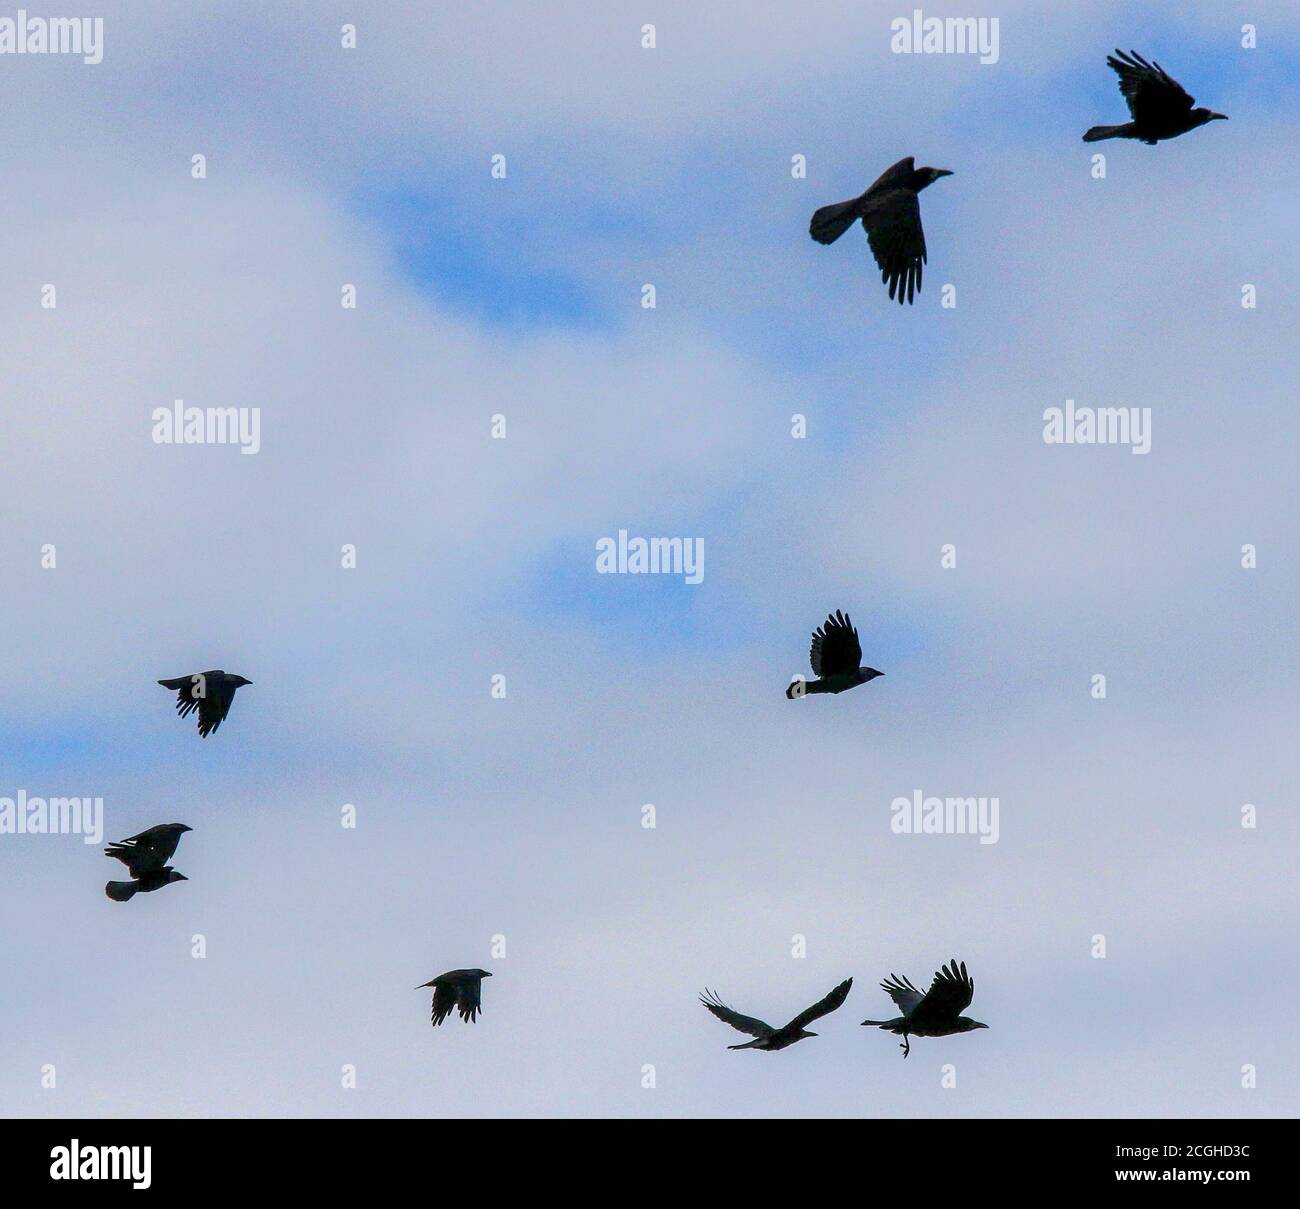 Magheralin, County Armagh, Northern Ireland. 11 Sep 2020. UK weather - after a wet morning with rain and heavy showers, clearer brighter weather is now beginning to sweep across Northern Ireland. Rooks crows and jackdaws rising from a barley field against blue sky. Credit: CAZIMB/Alamy Live News. Stock Photo